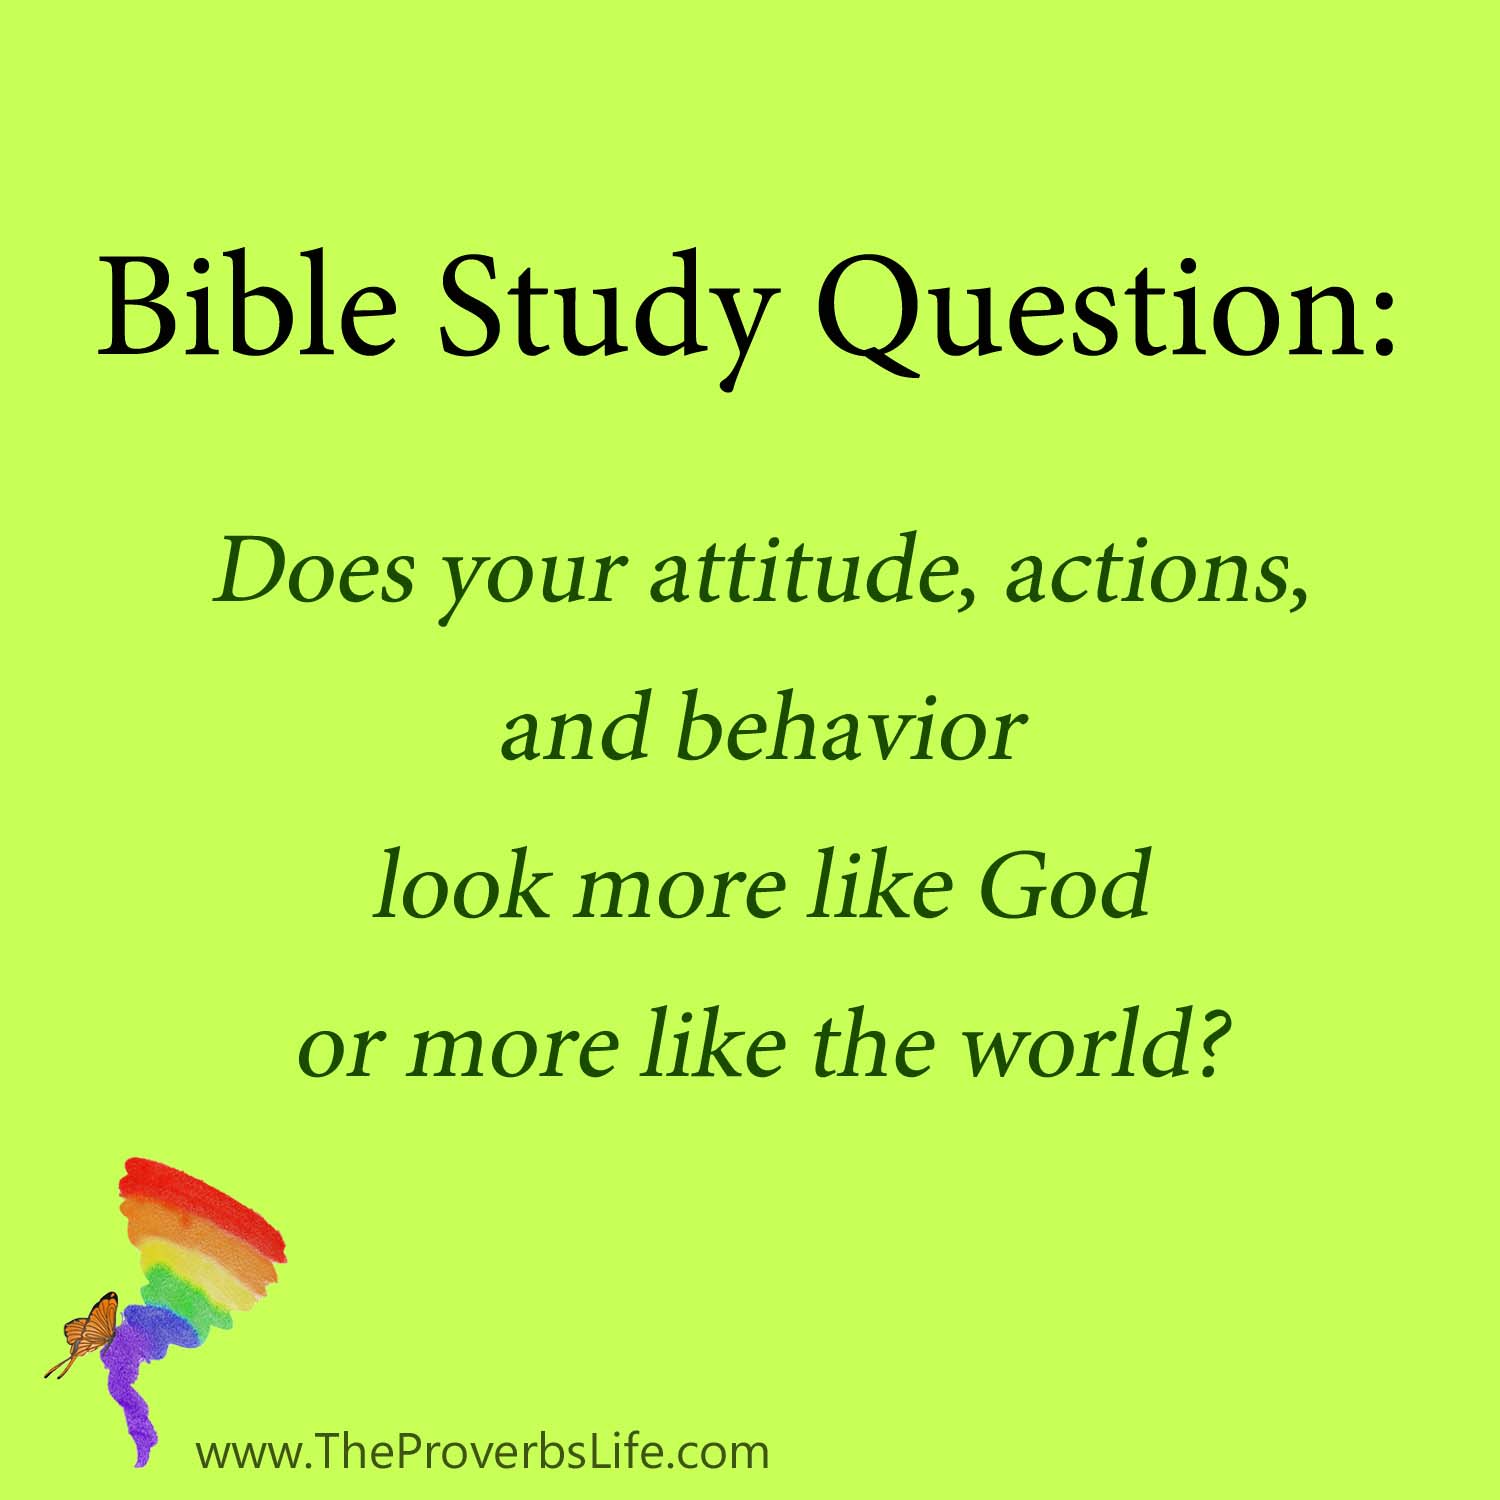 Bible Study Question